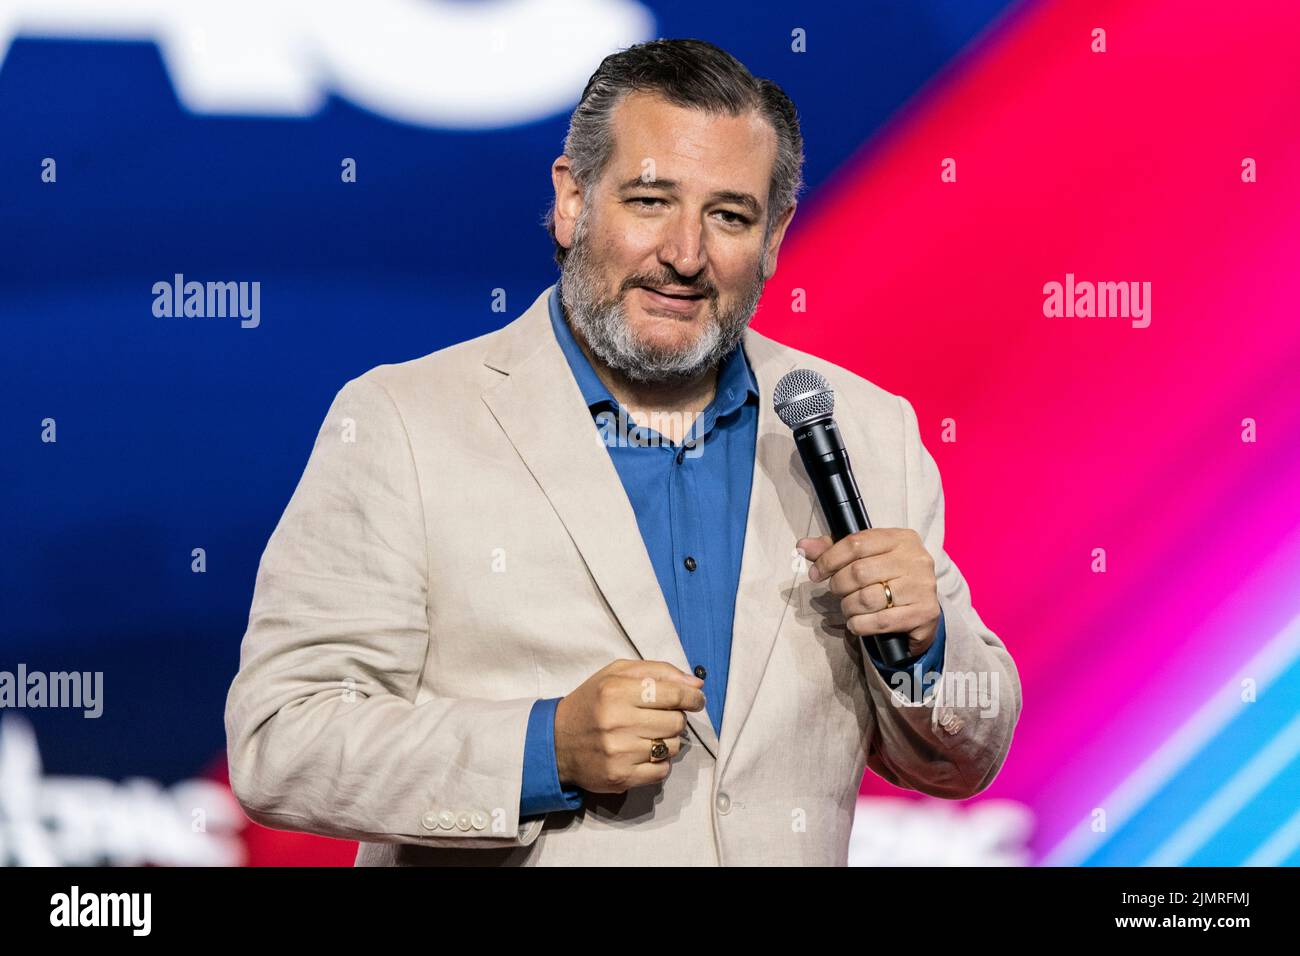 Dallas, TX - August 5, 2022: Senator Ted Cruz speaks during CPAC Texas 2022 conference at Hilton Anatole Stock Photo